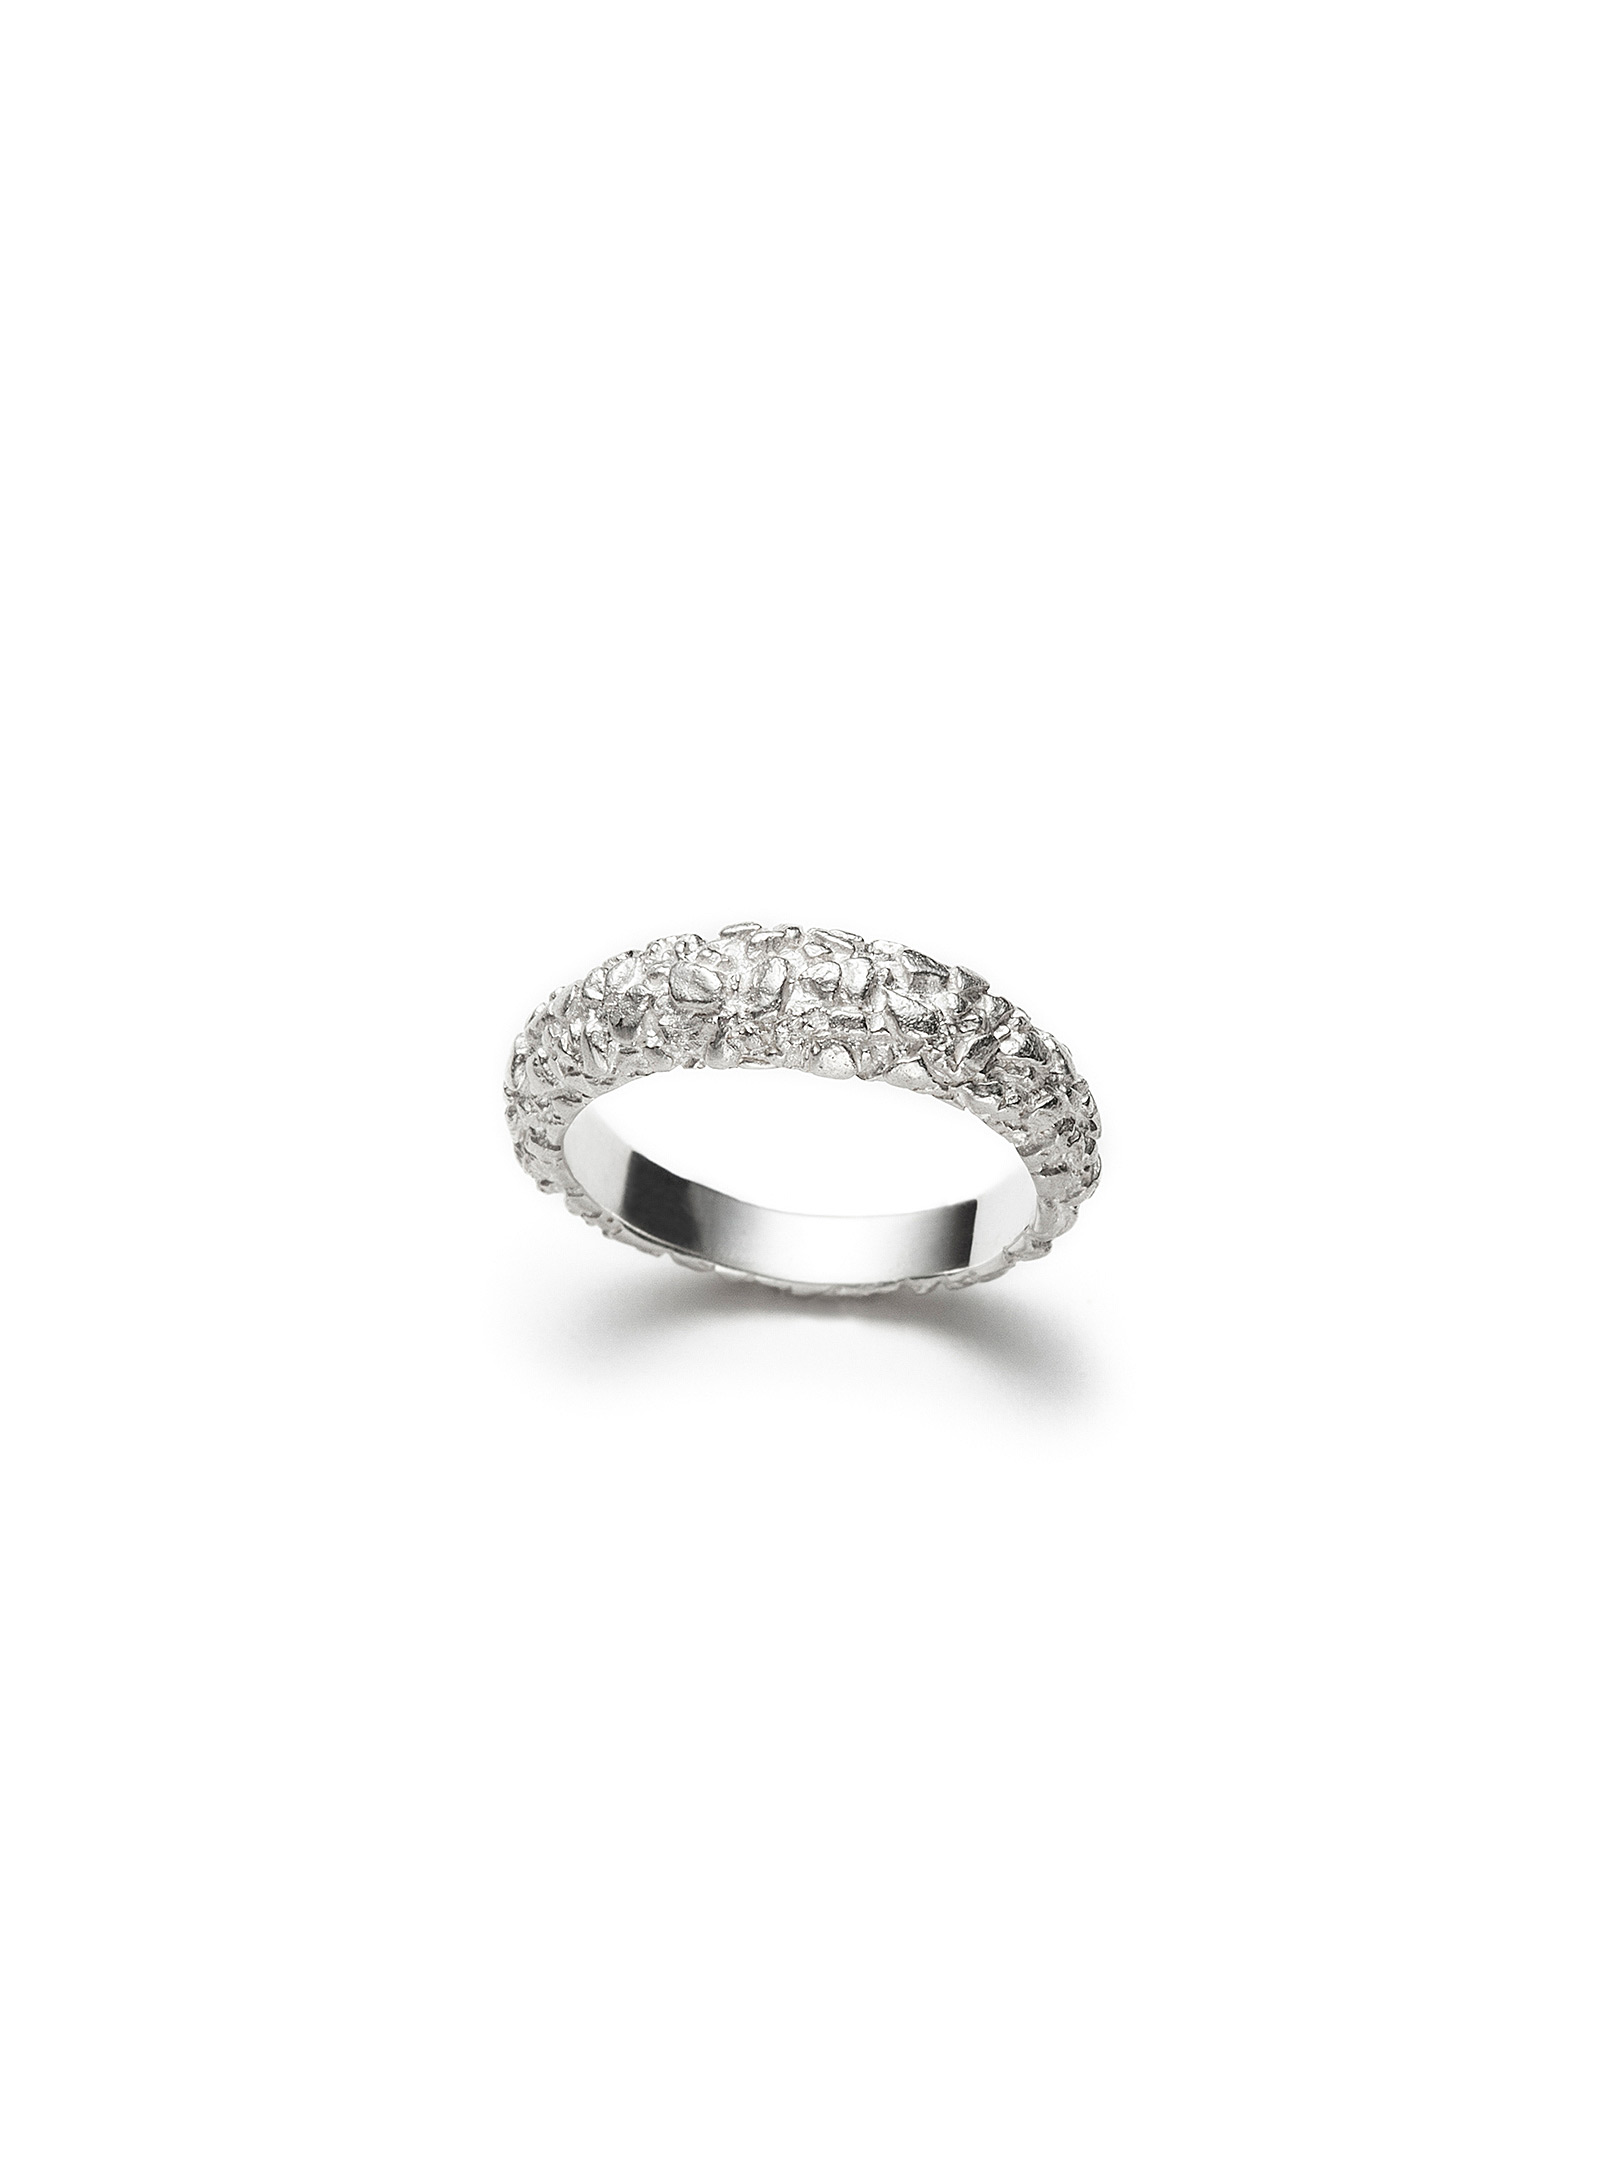 Atelier LAF - Ethereal ring